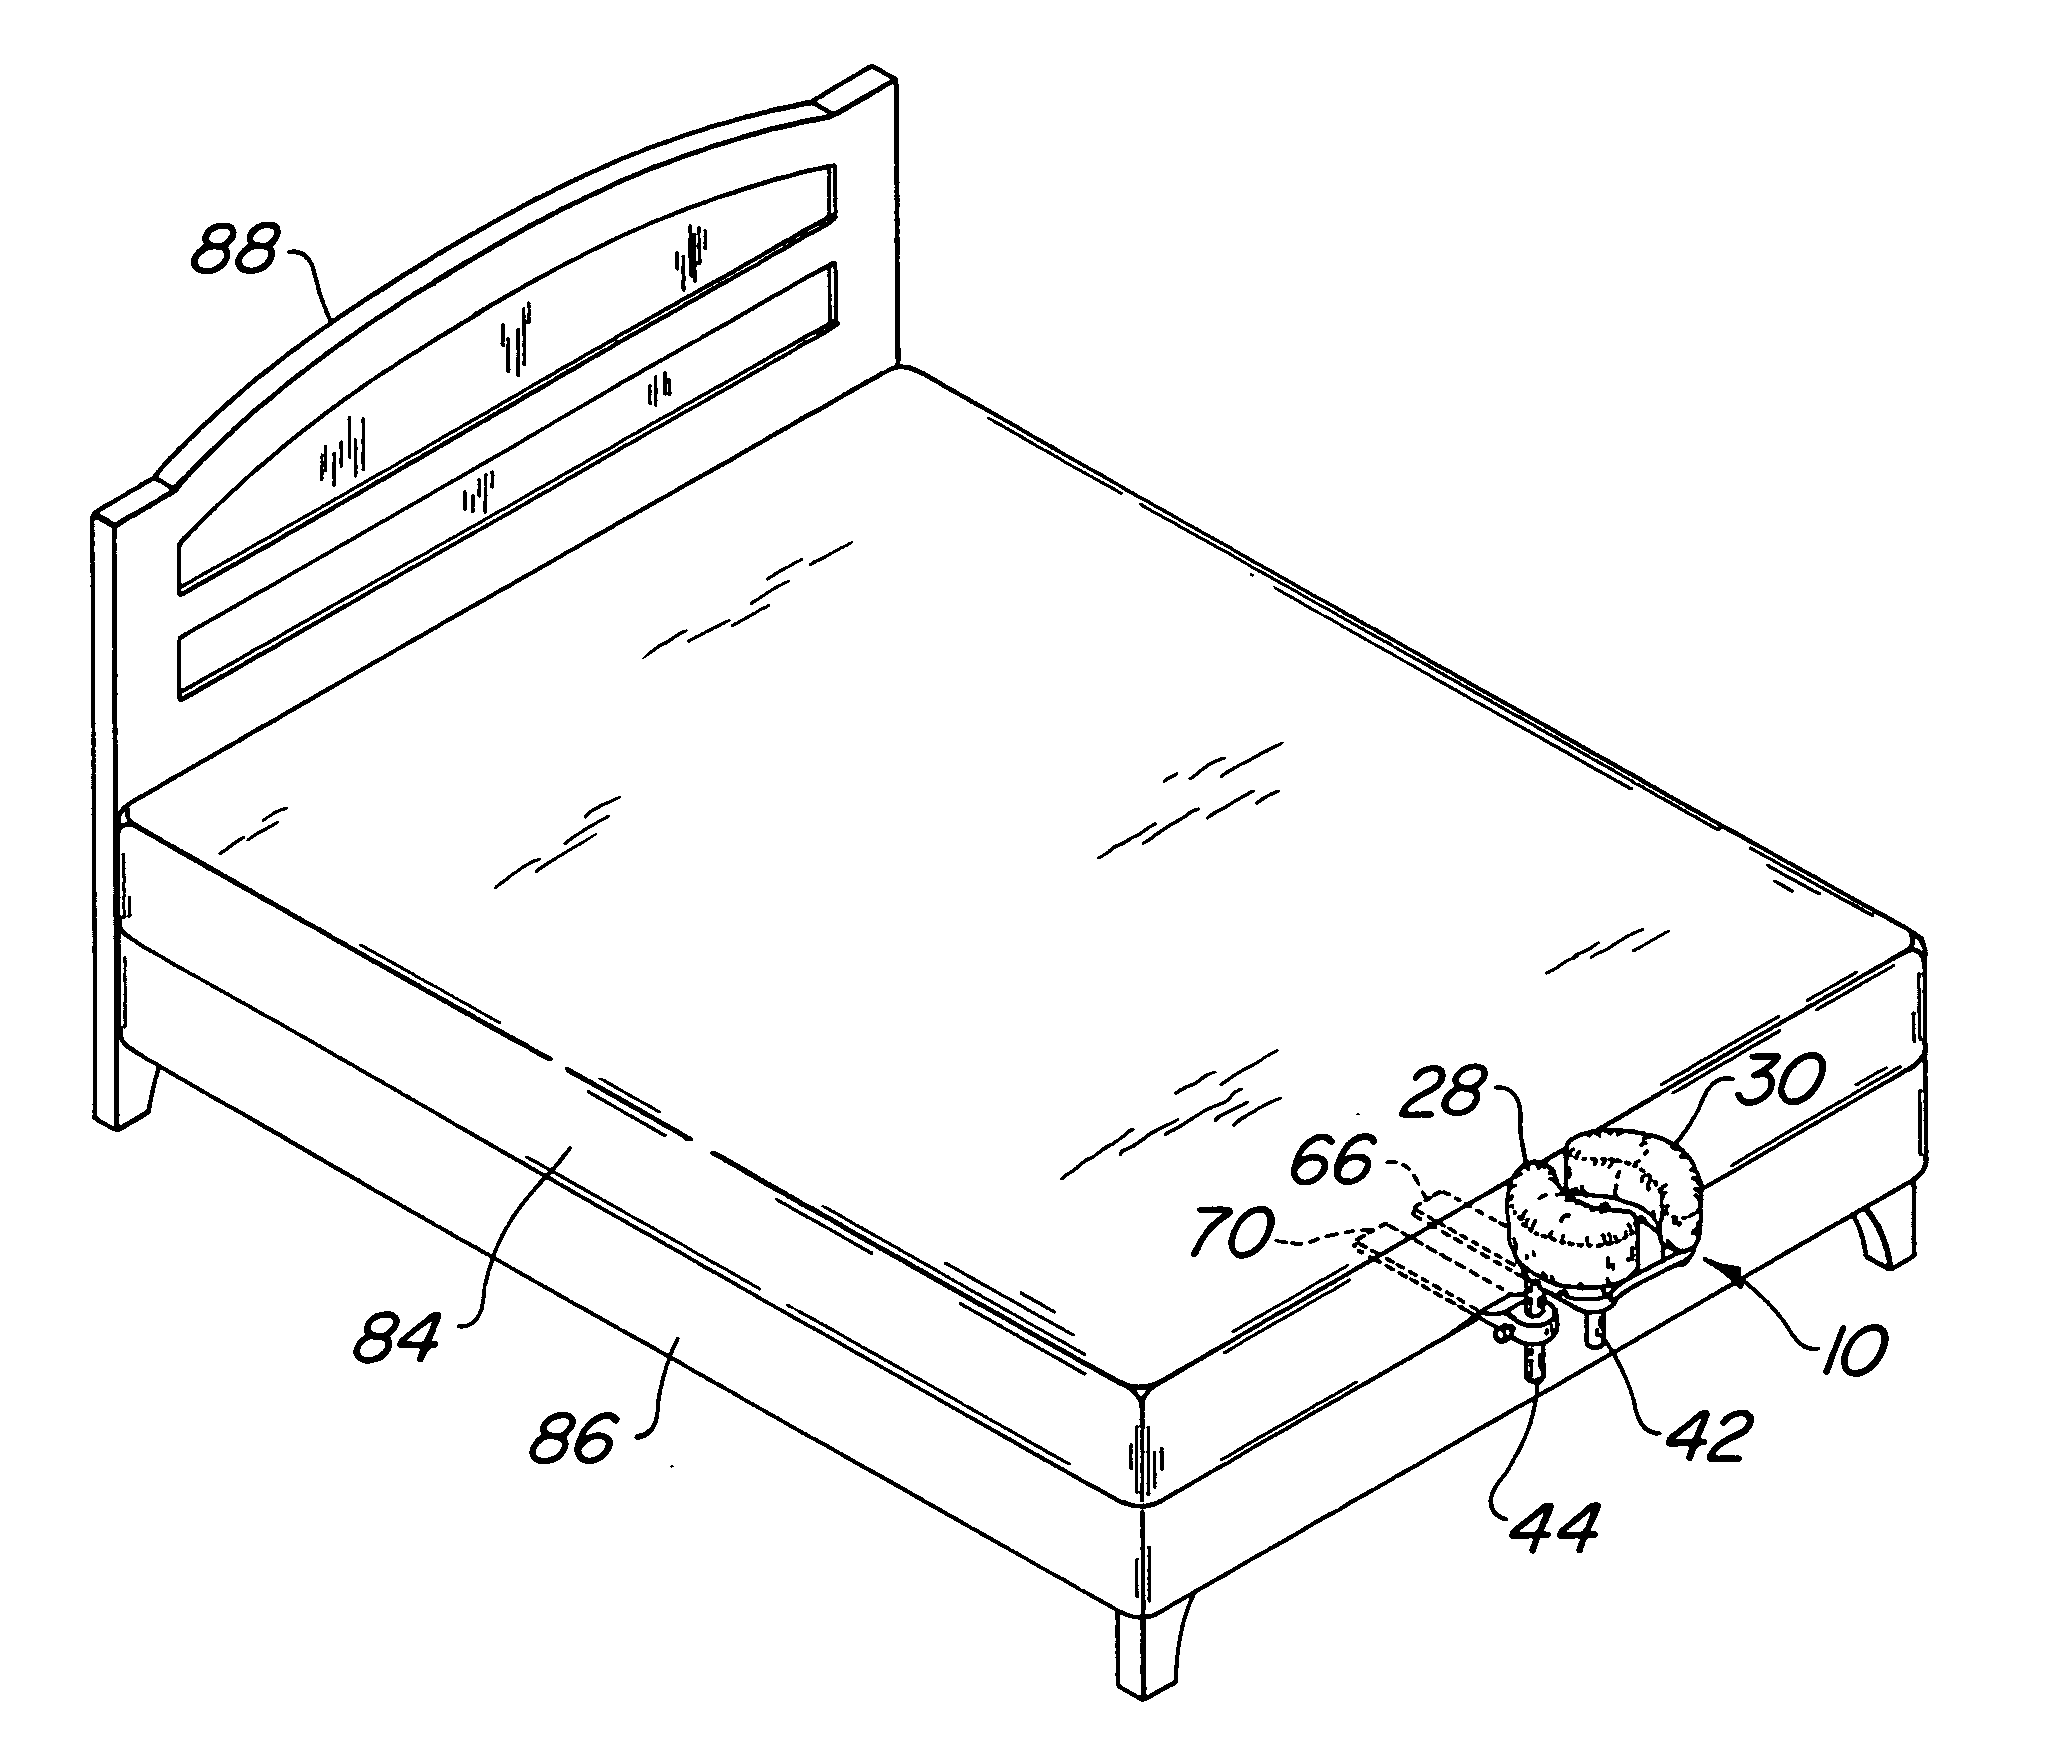 Head support with bed extension